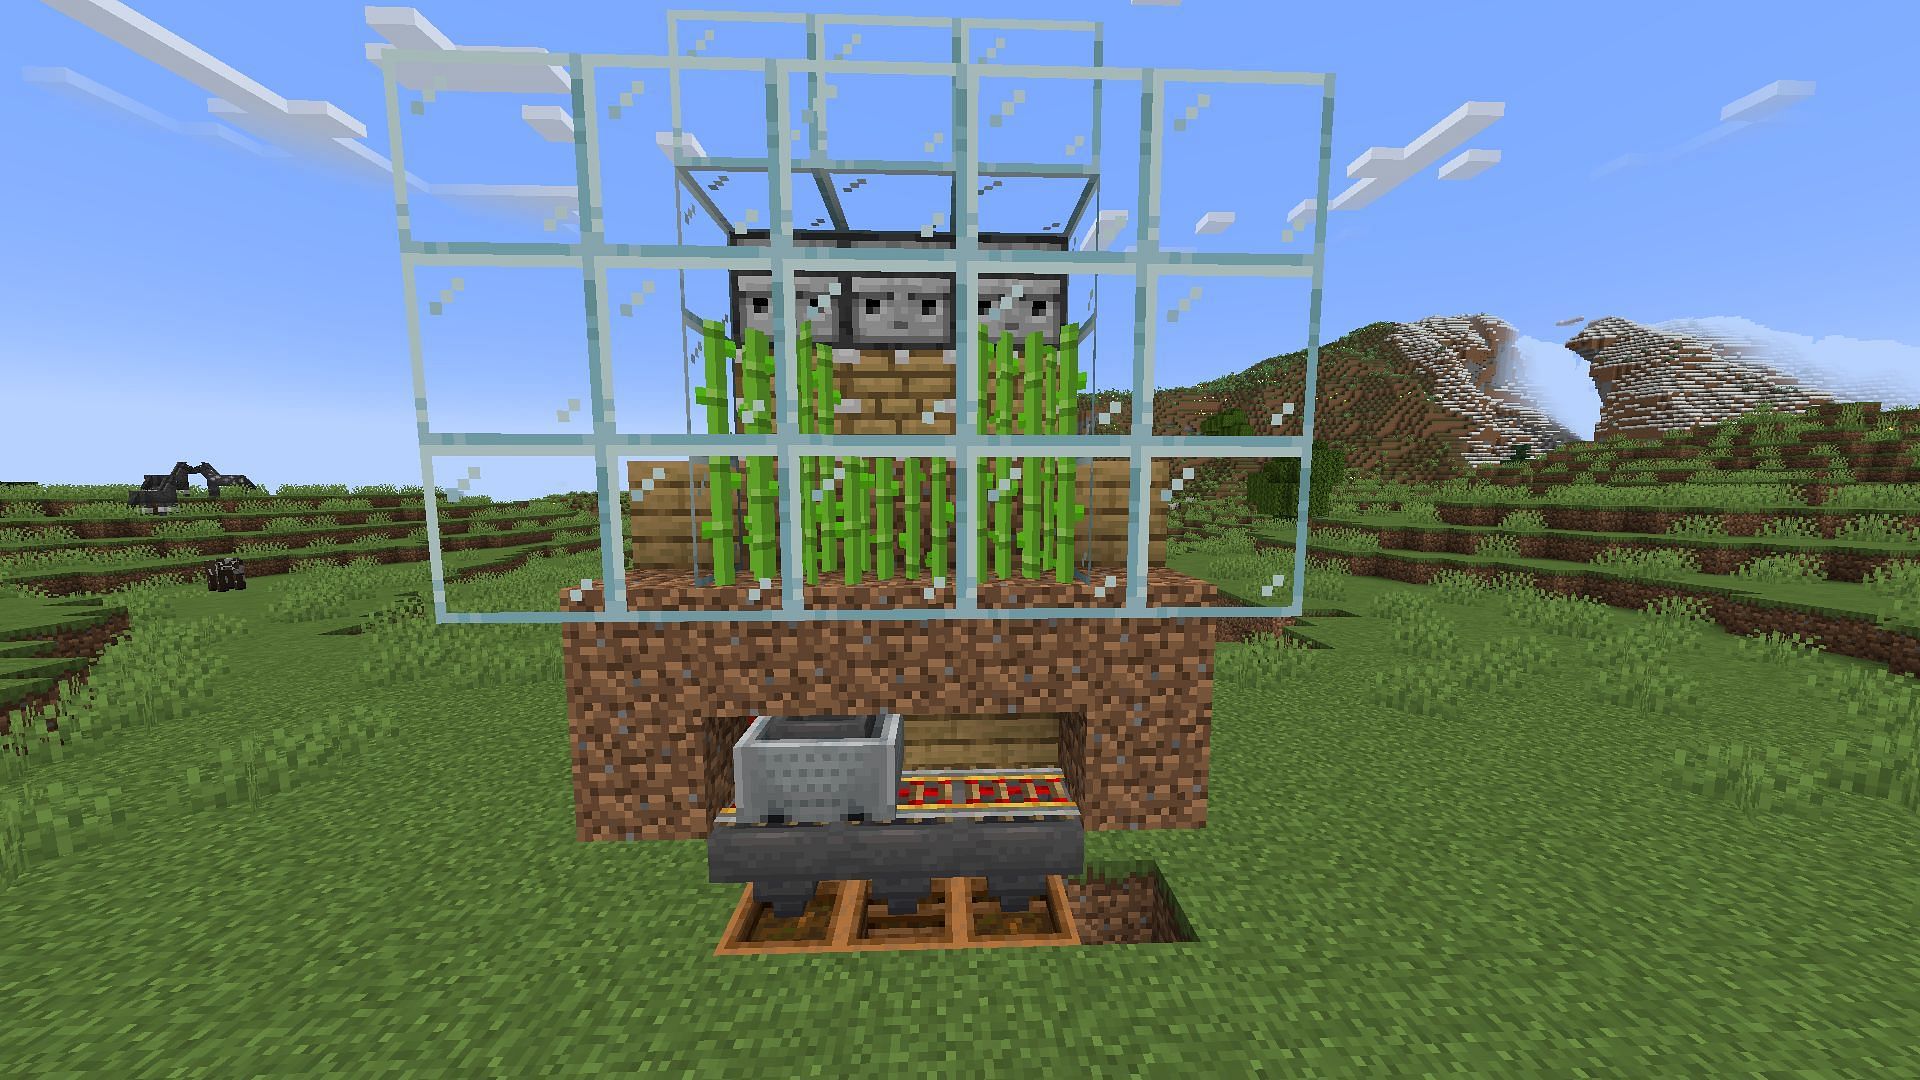 A bone meal farm can be created by feeding composters and automatically growing crops in Minecraft (Image via Mojang)